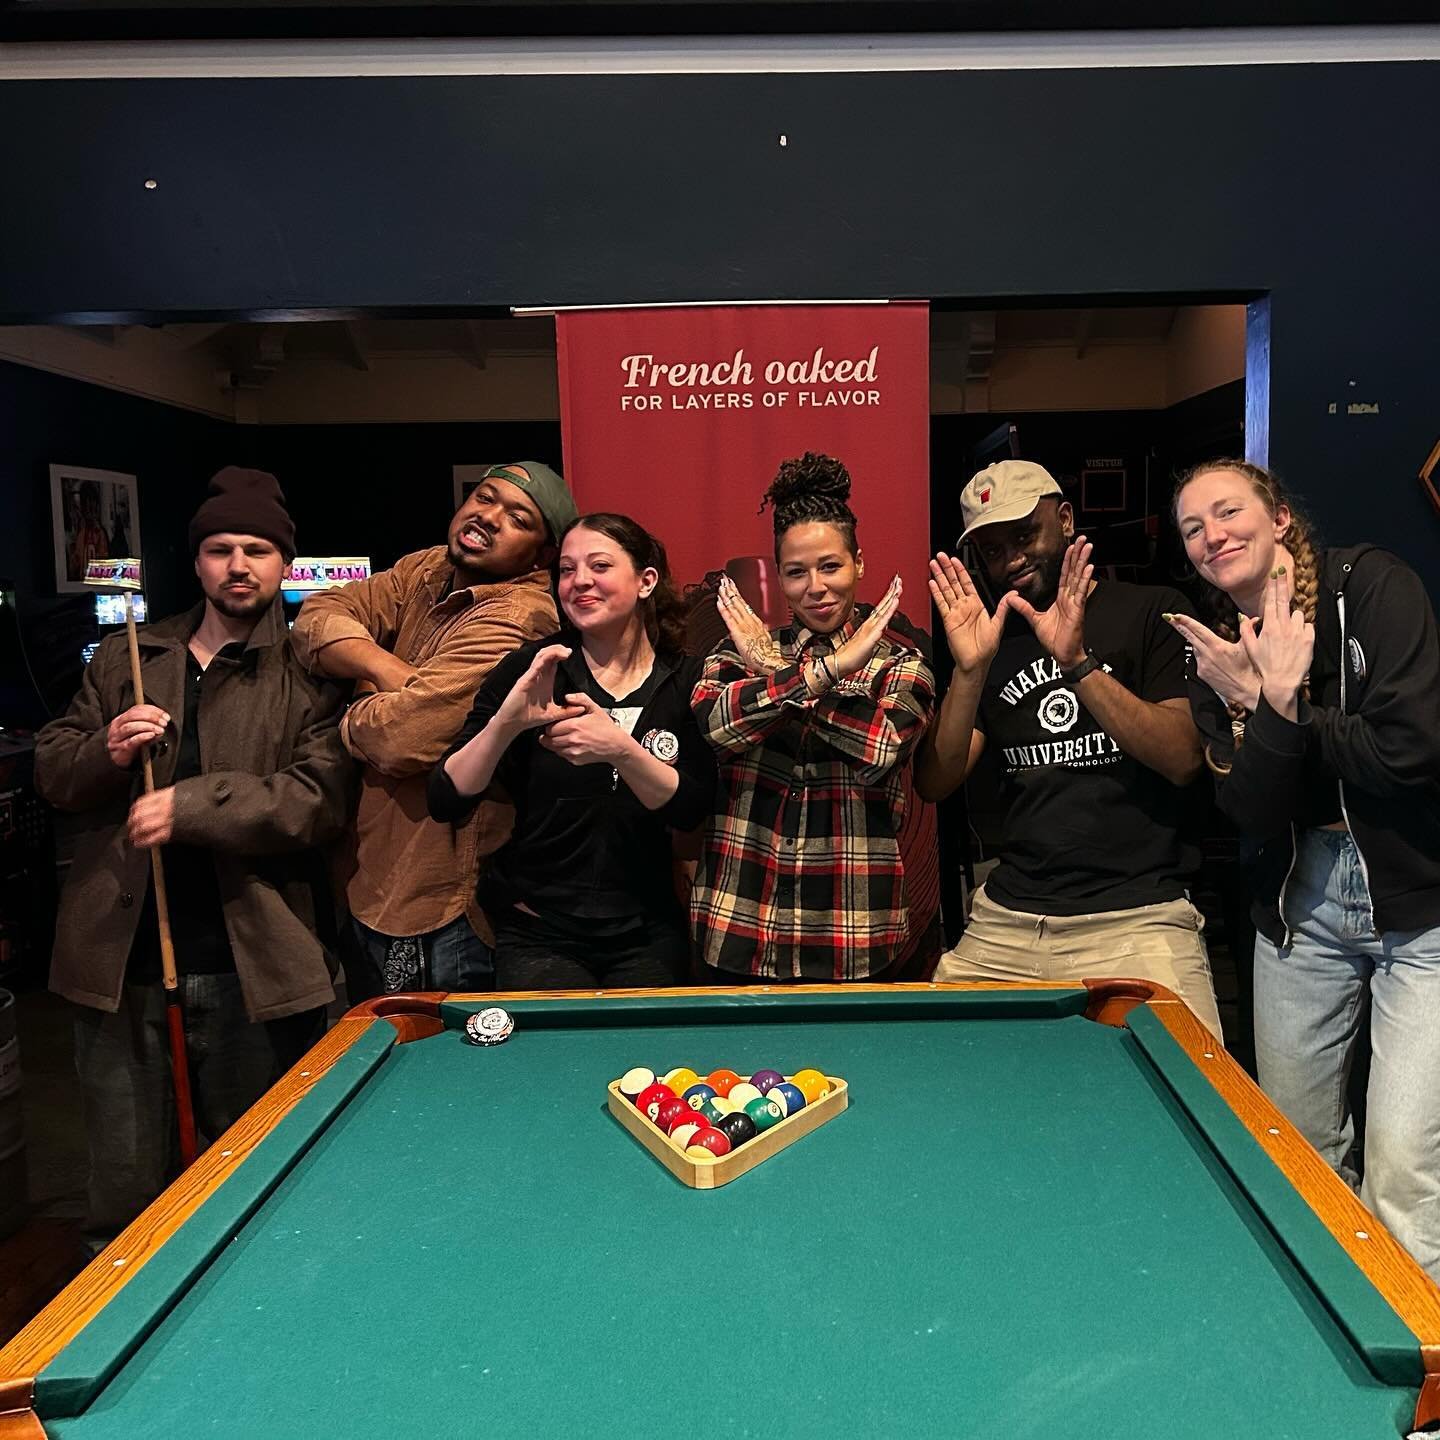 Congrats @georgeandwaltsbar for the championship win at our industry pool league! 🏆 

It&rsquo;s been a blast hosting these every week and getting to compete against other Oakland establishments. 

We also wanna send a big thank you and shoutout the